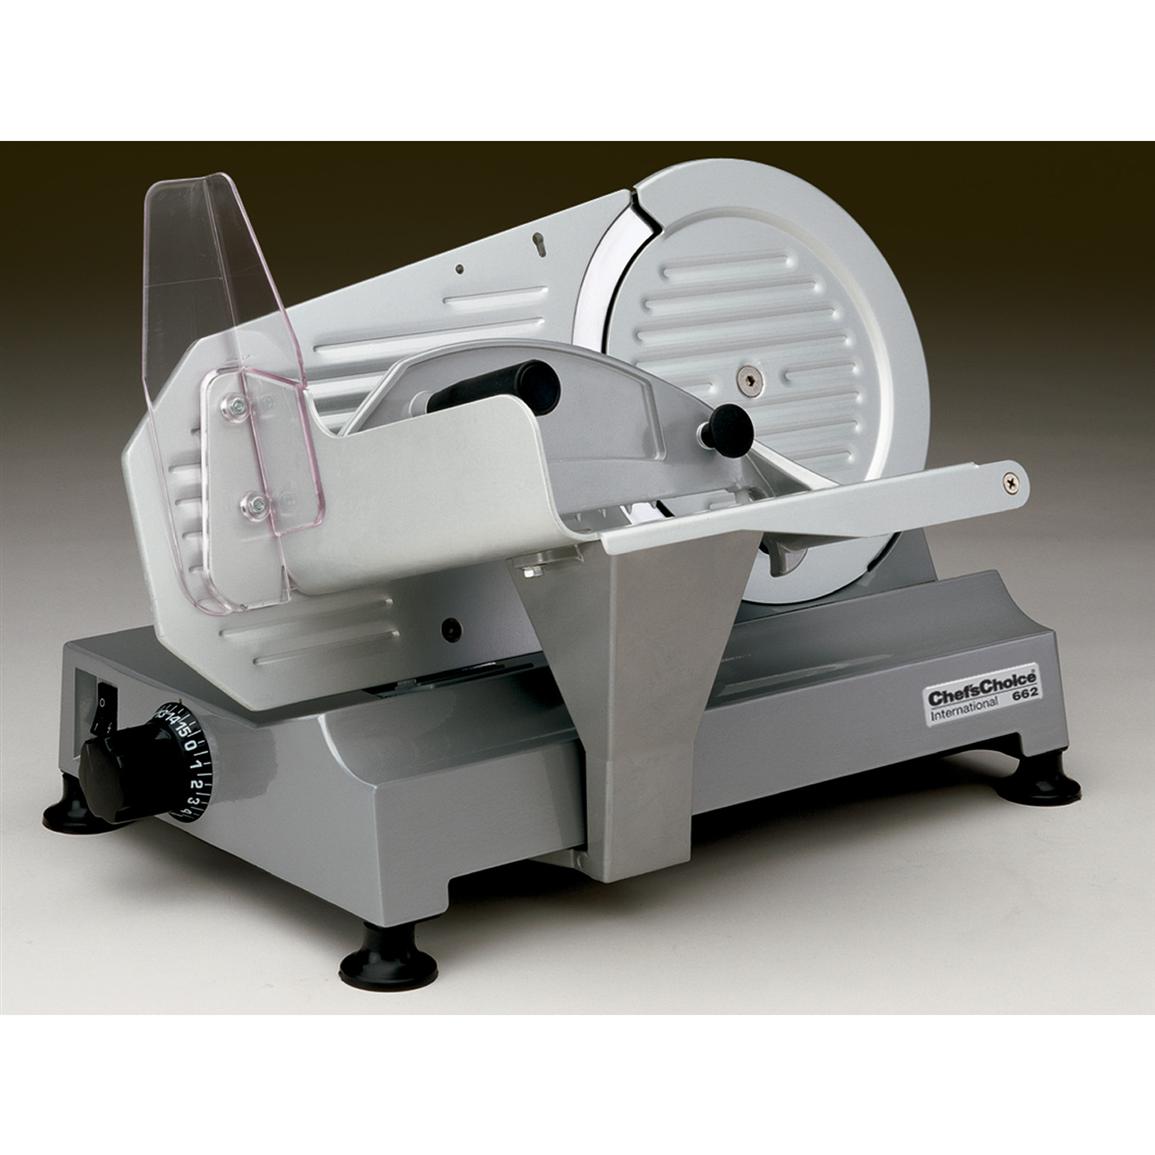 Chef's Choice® Professional Electric Food Slicer - 113743, Meat Slicers